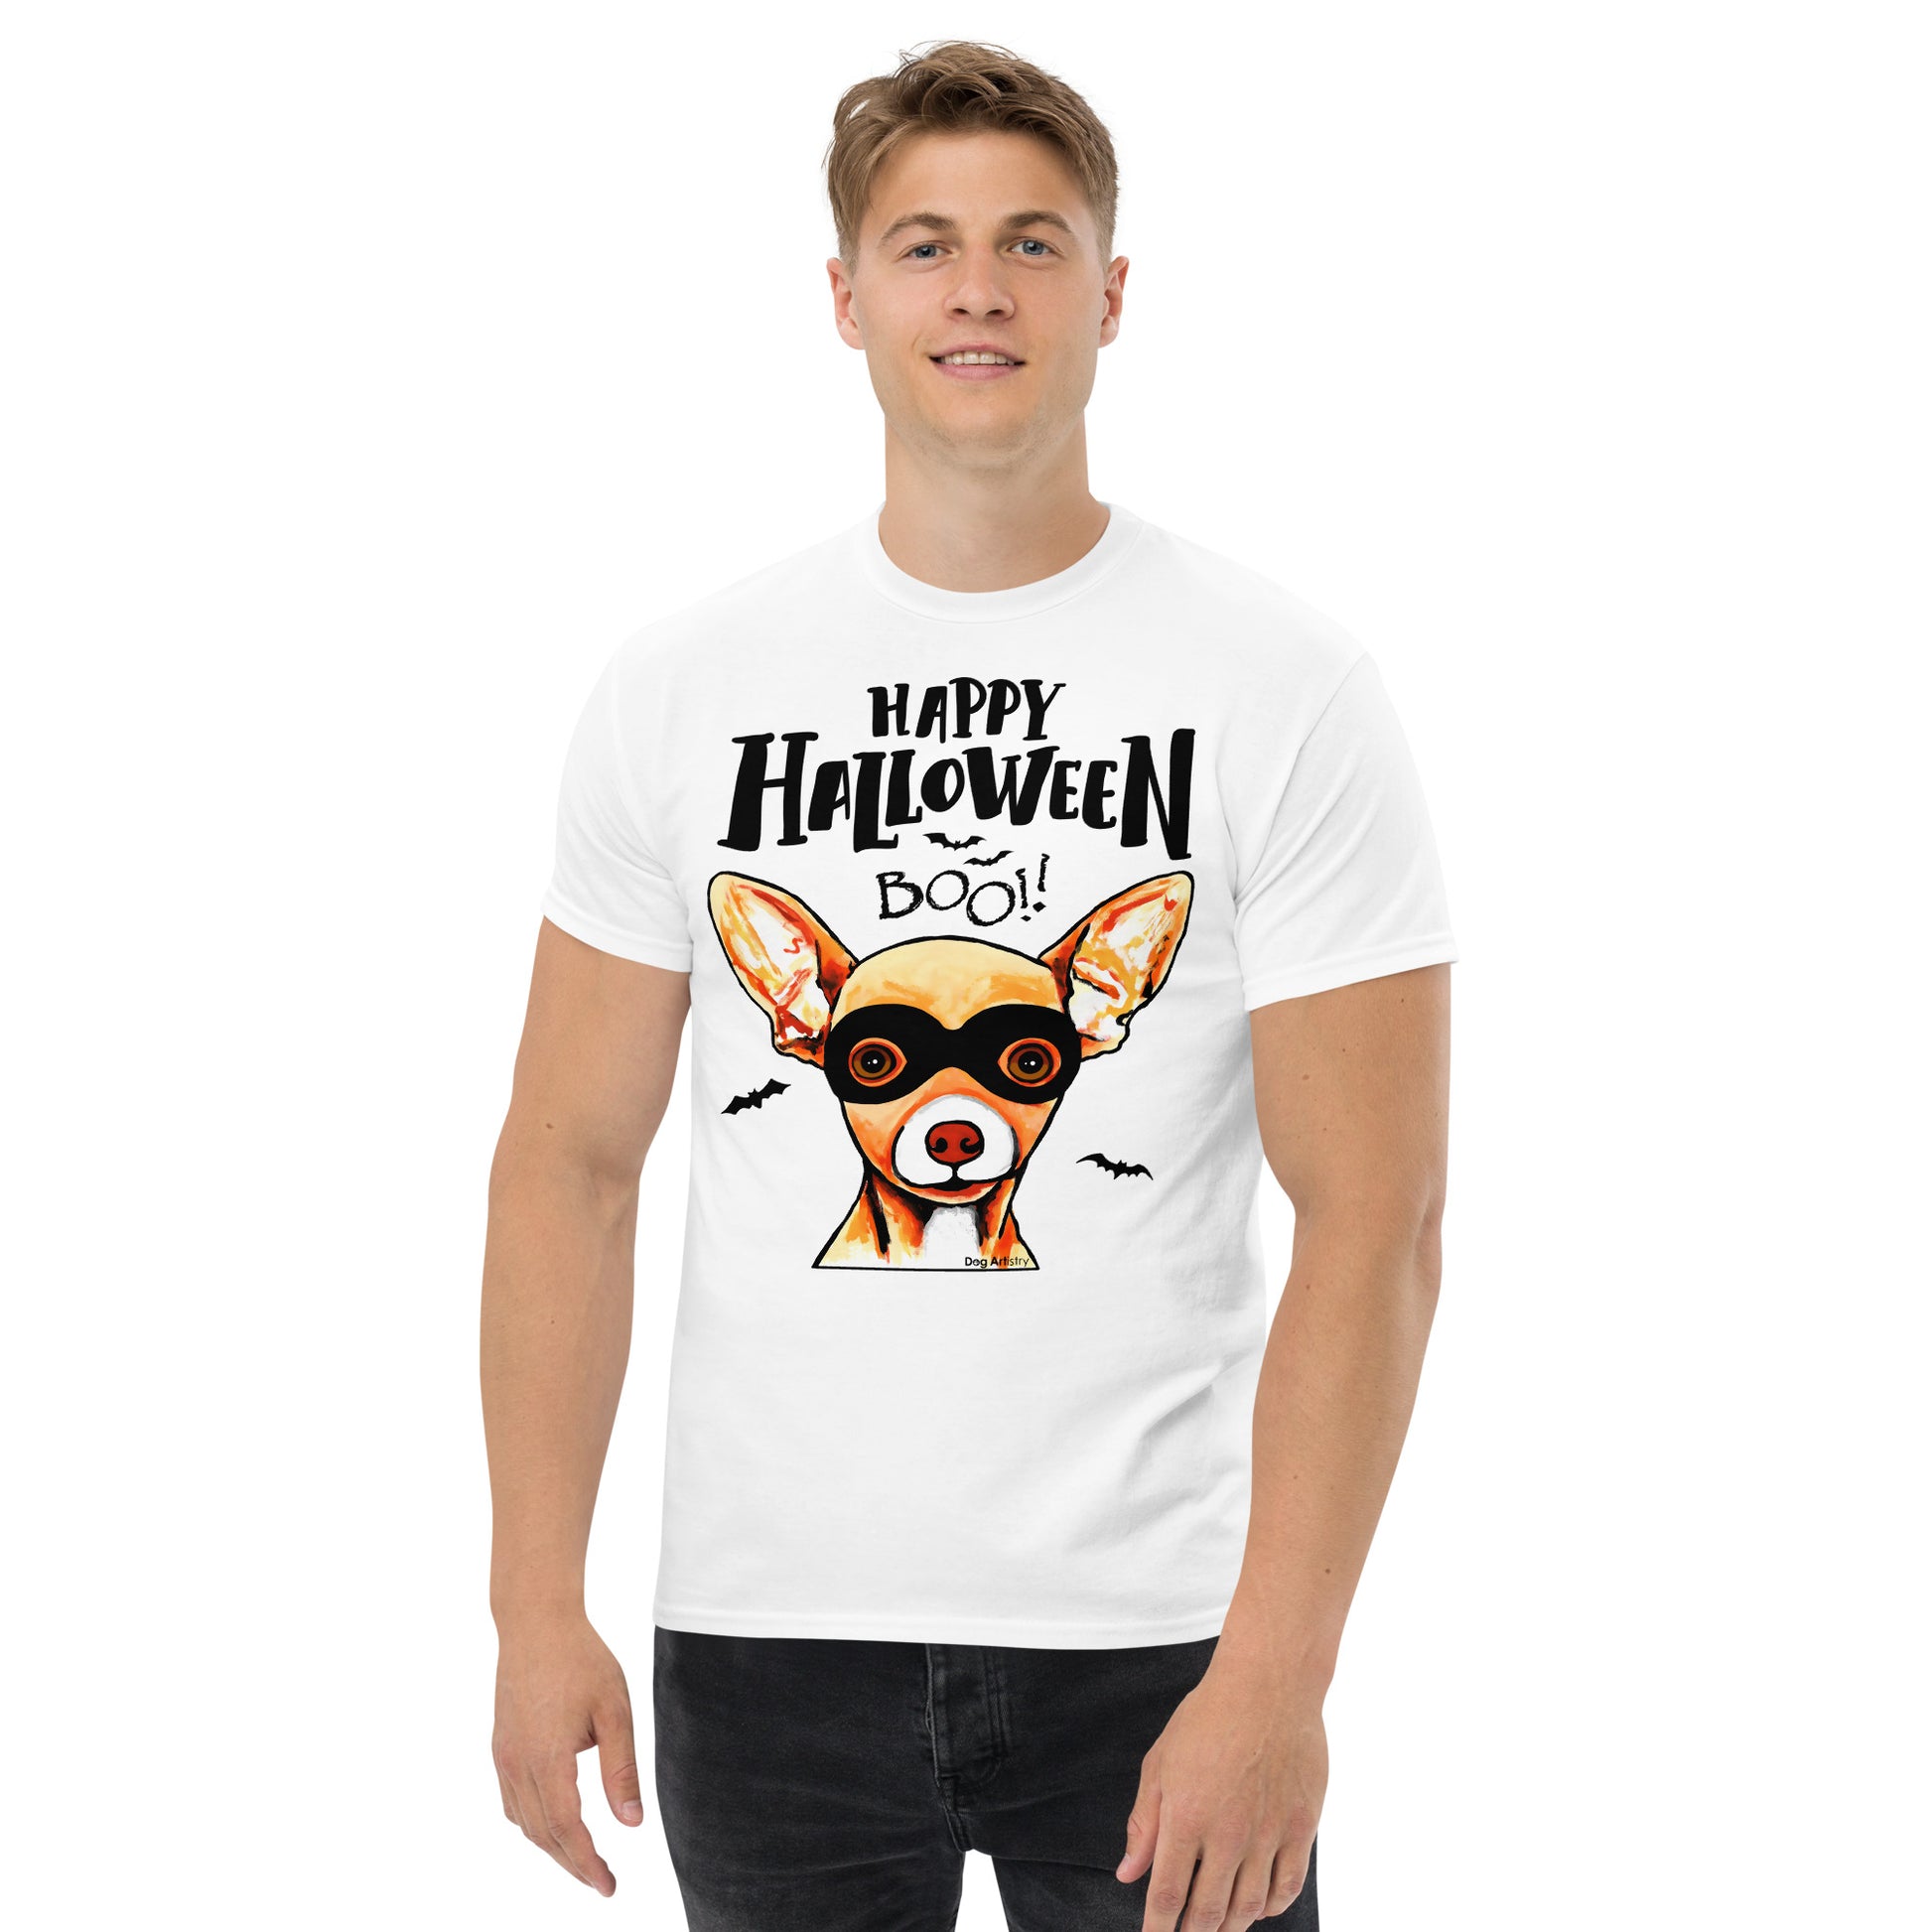 Funny Happy Halloween Chihuahua wearing mask men’s white t-shirt by Dog Artistry.